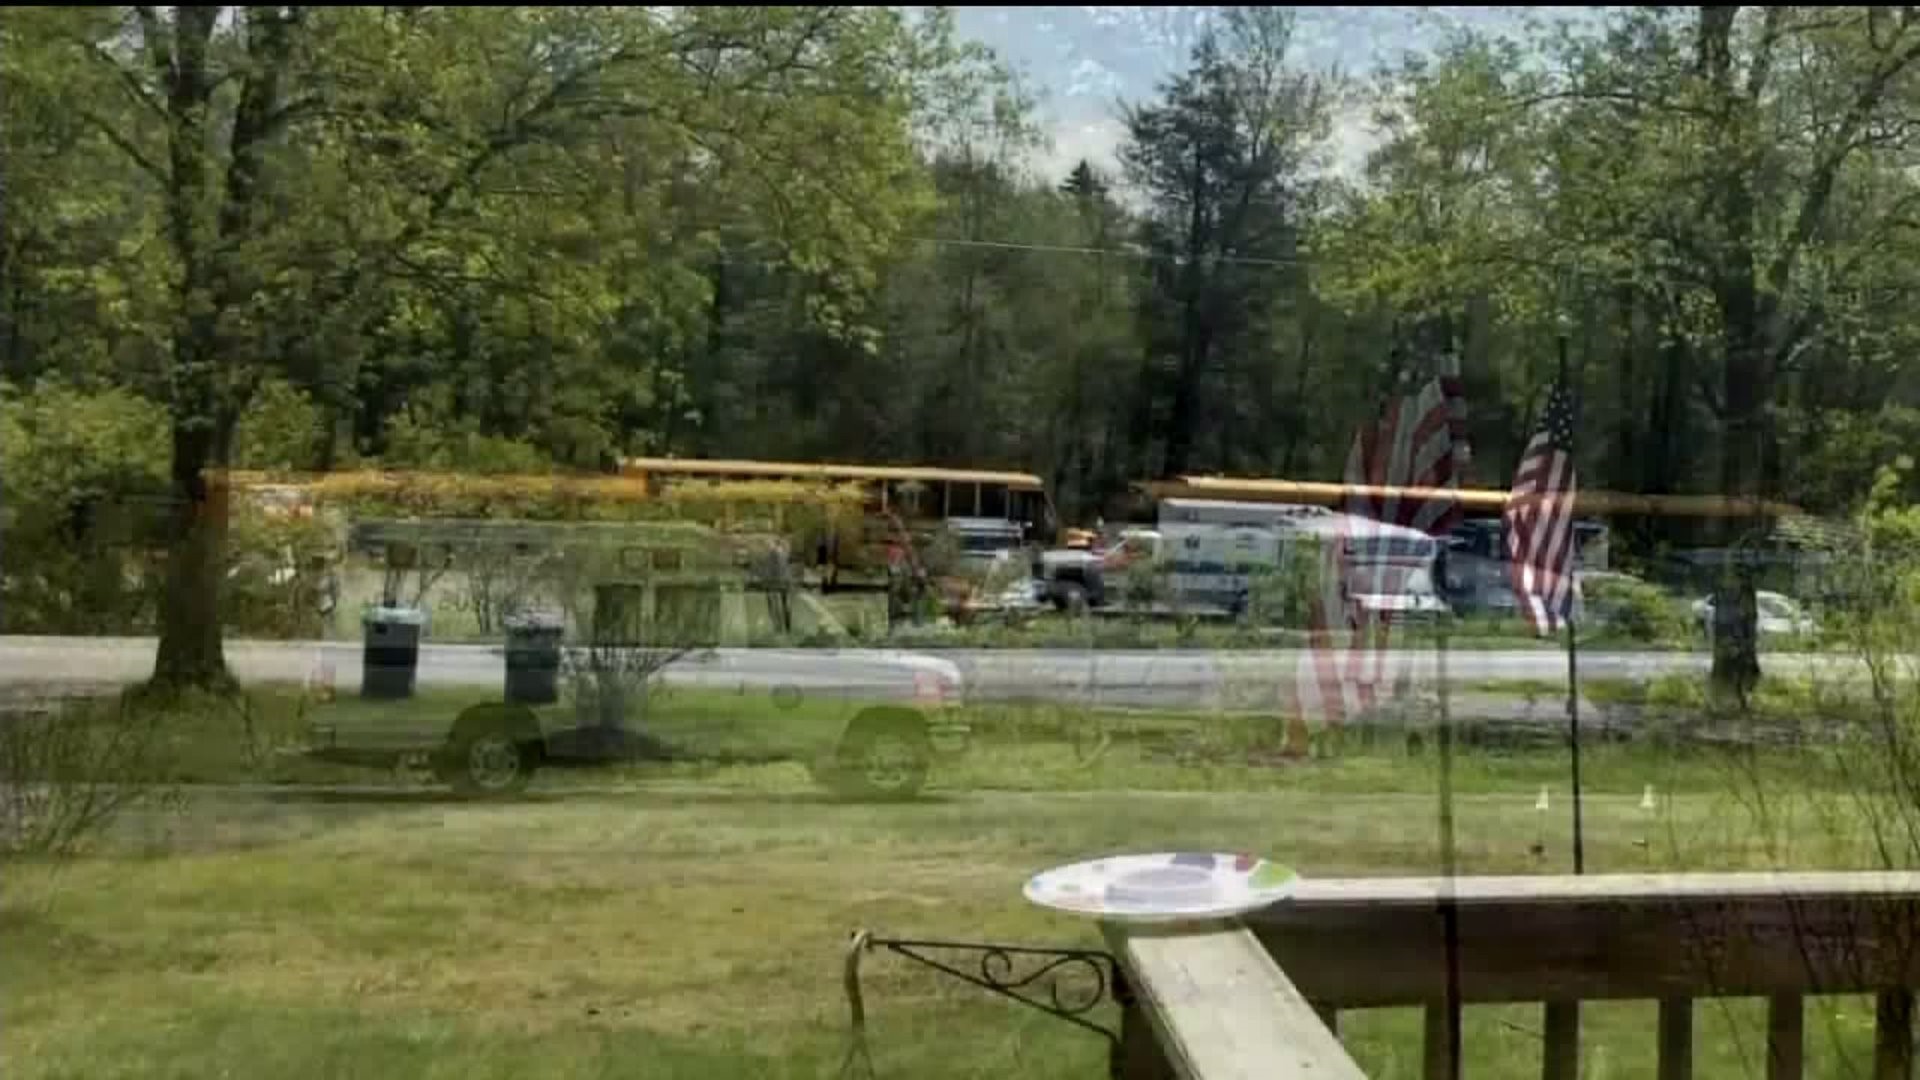 Students Sent to Hospital After School Bus Hits Rock